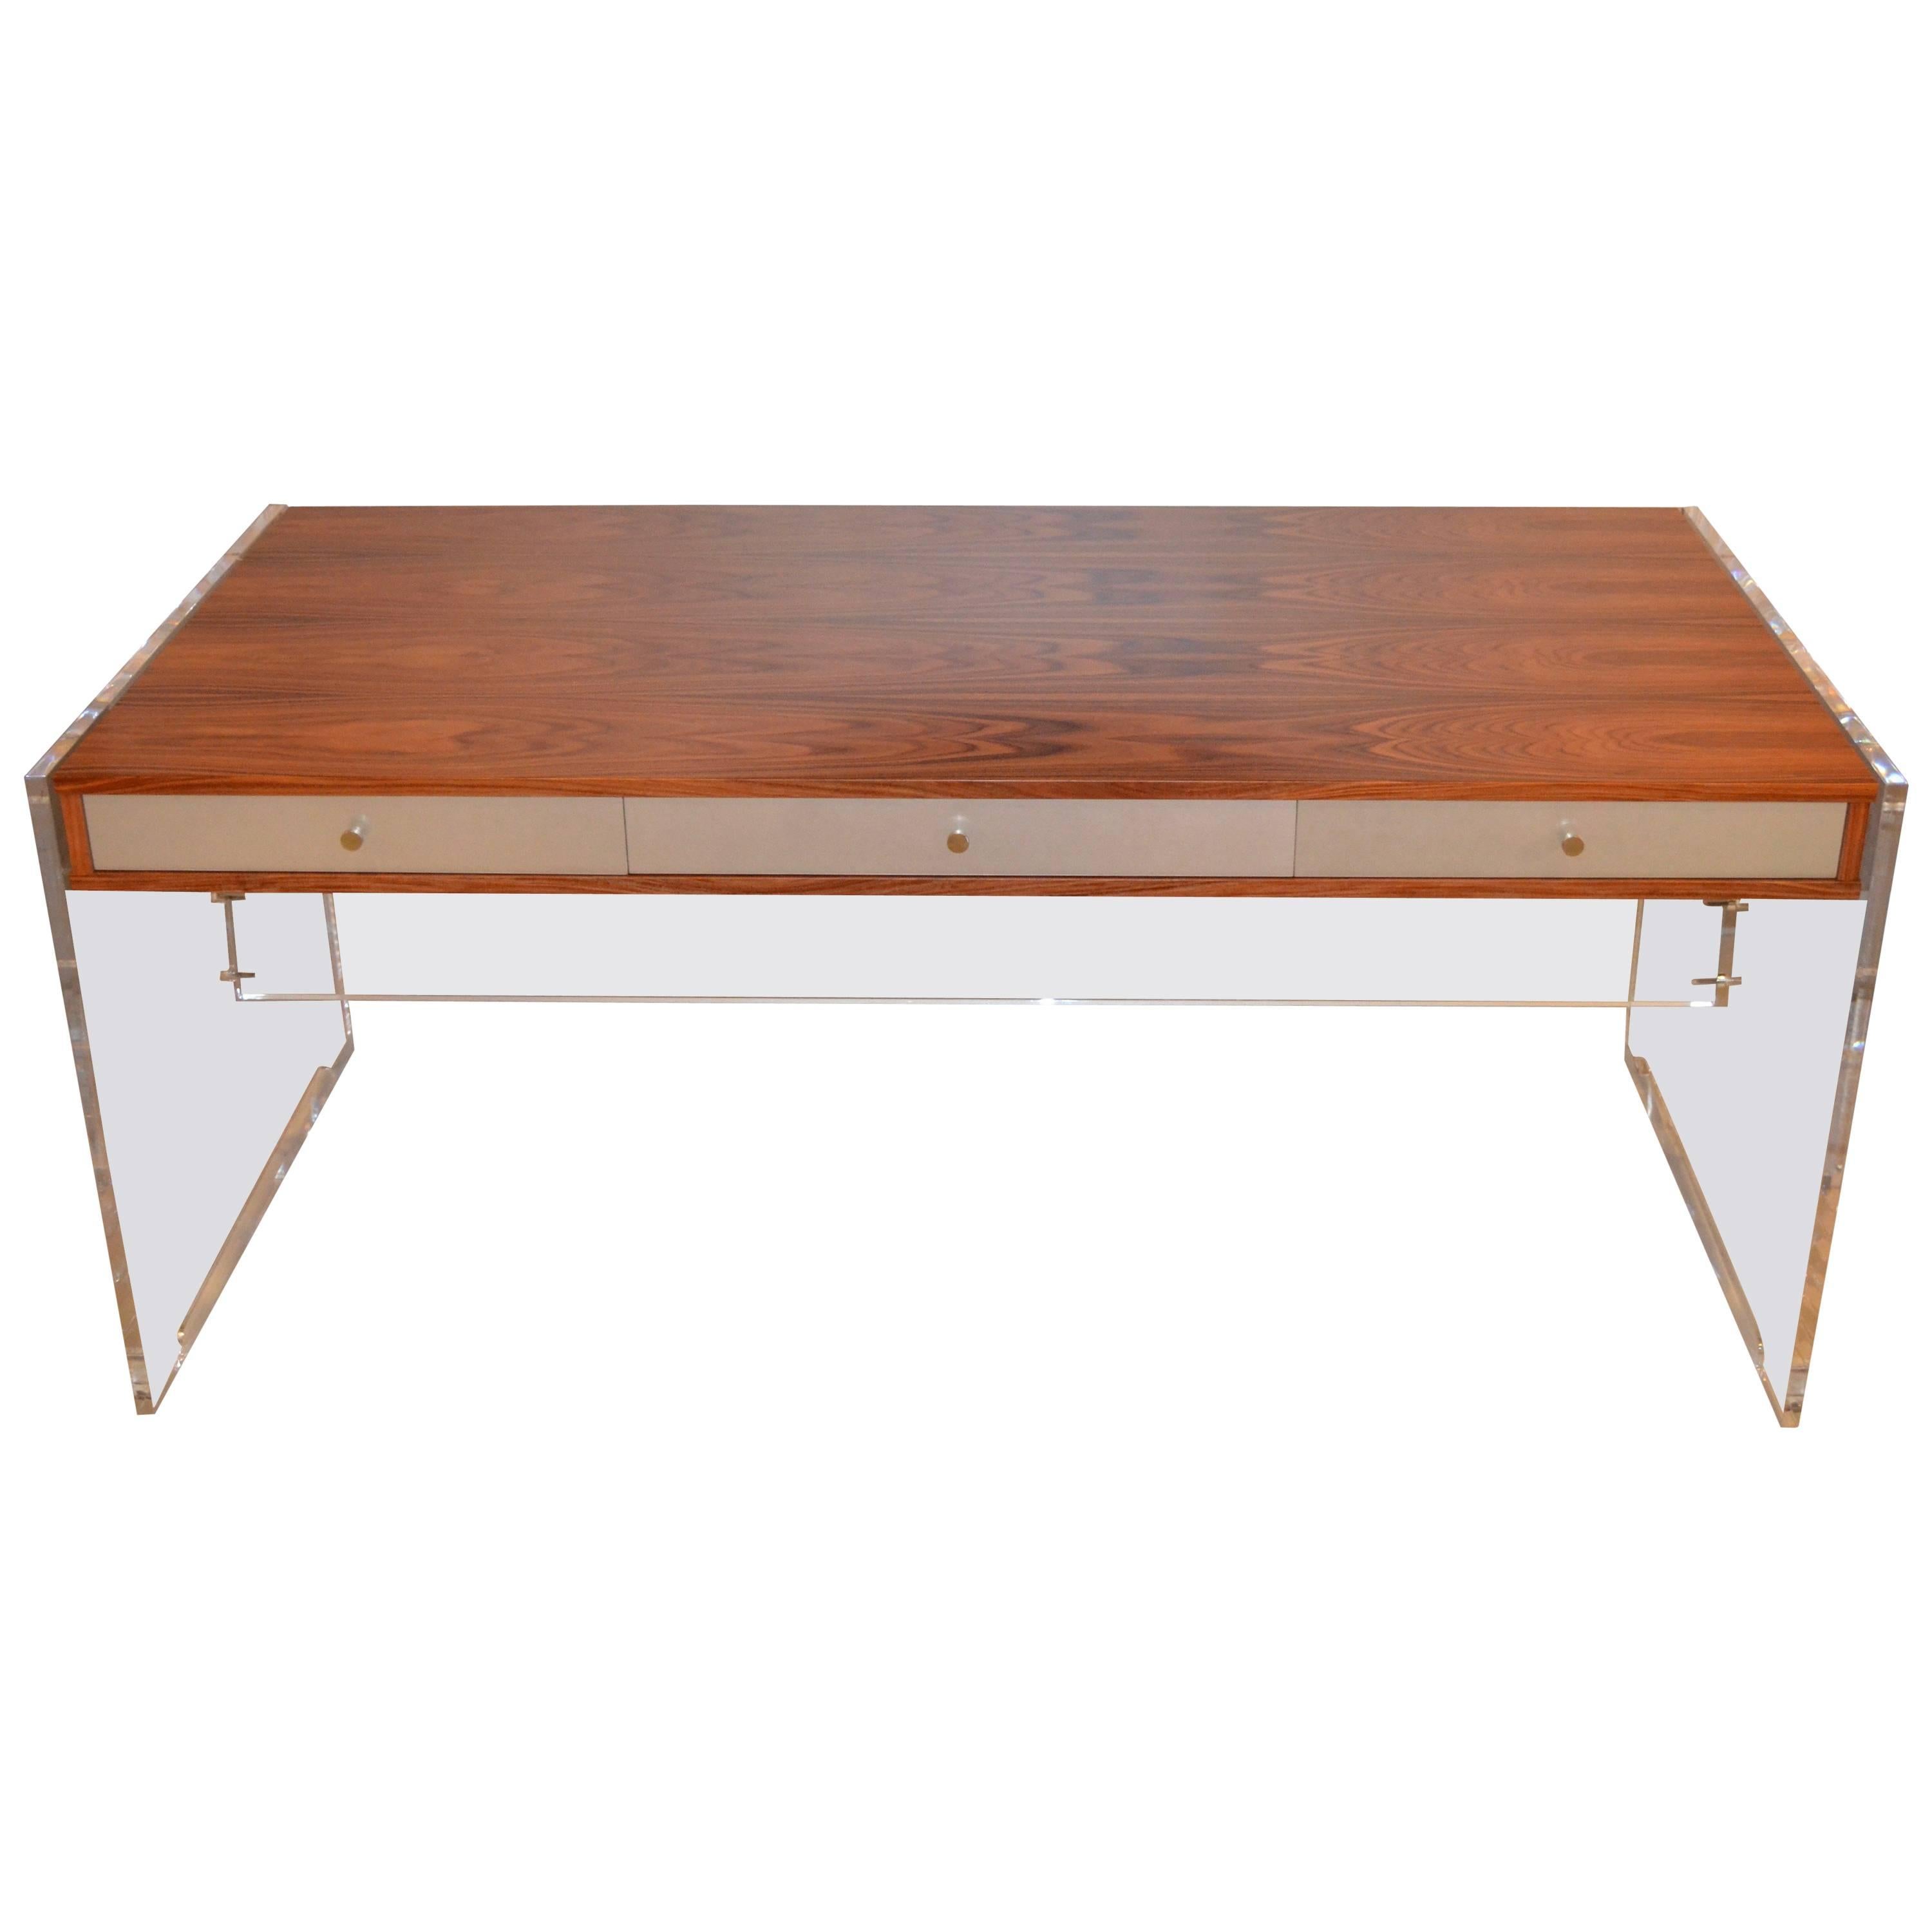 Poul Norreklit Desk in Rosewood and Lucite